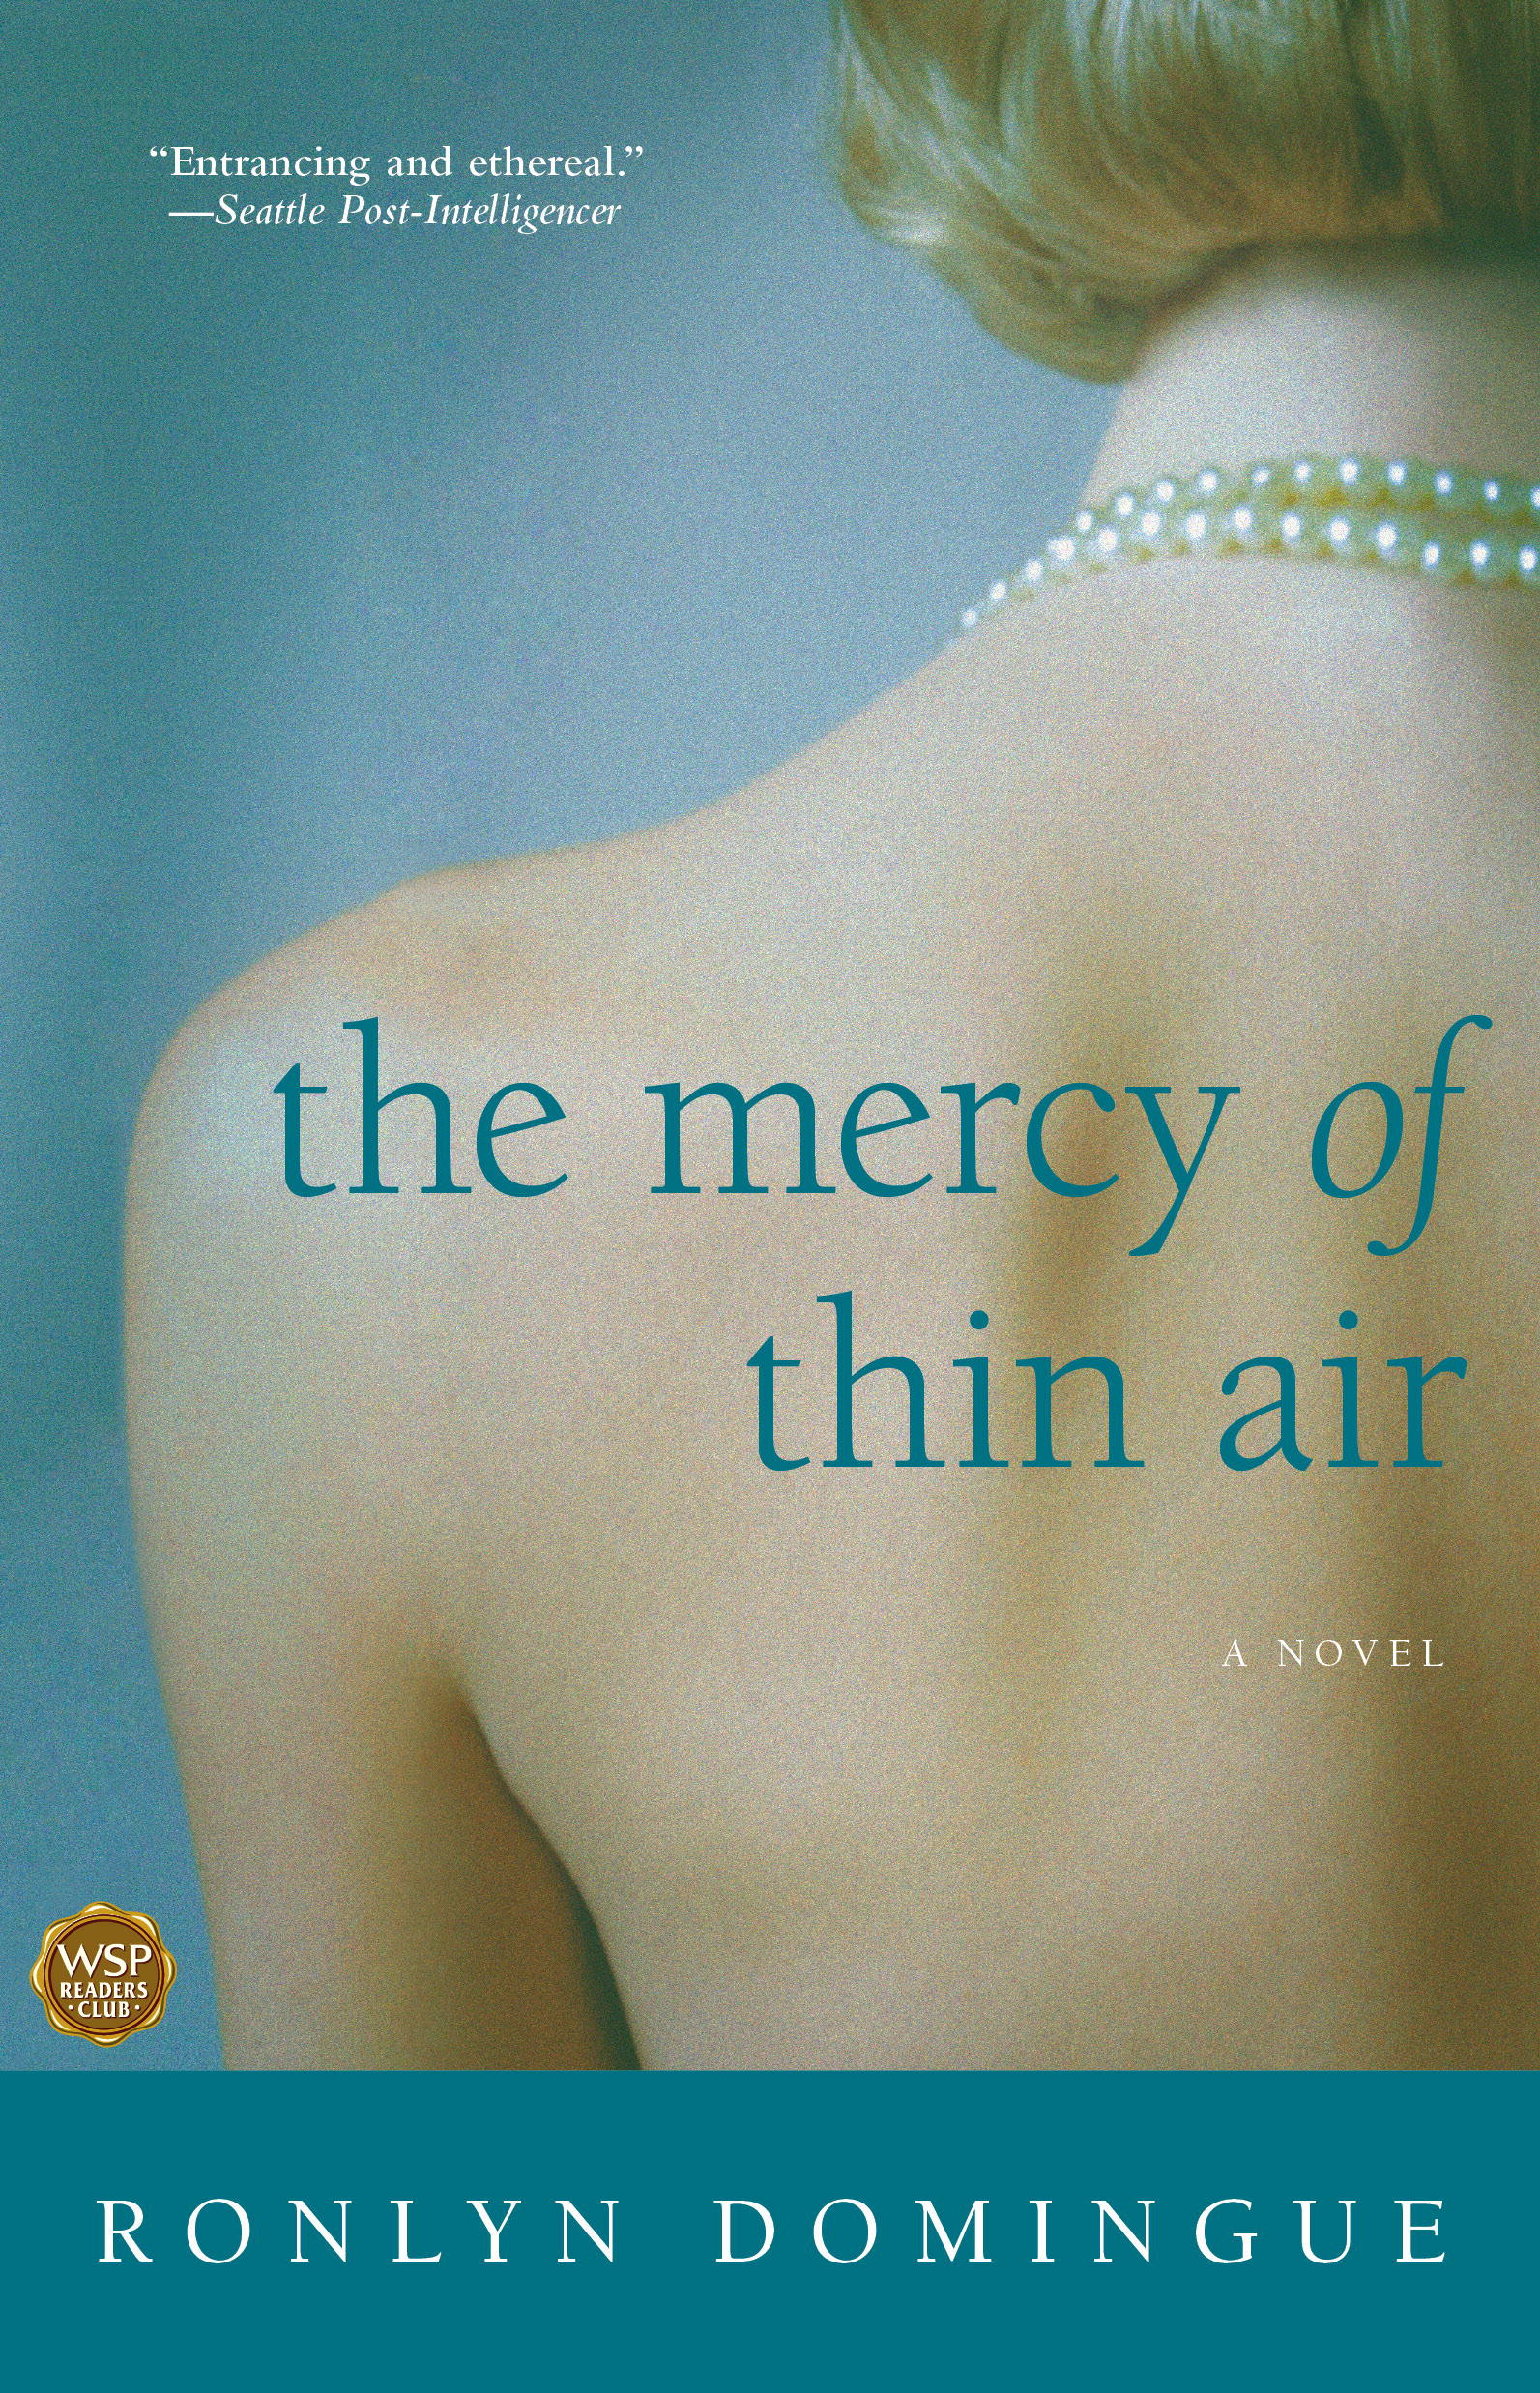 Book jacket of THE MERCY OF THIN AIR by Ronlyn Domingue